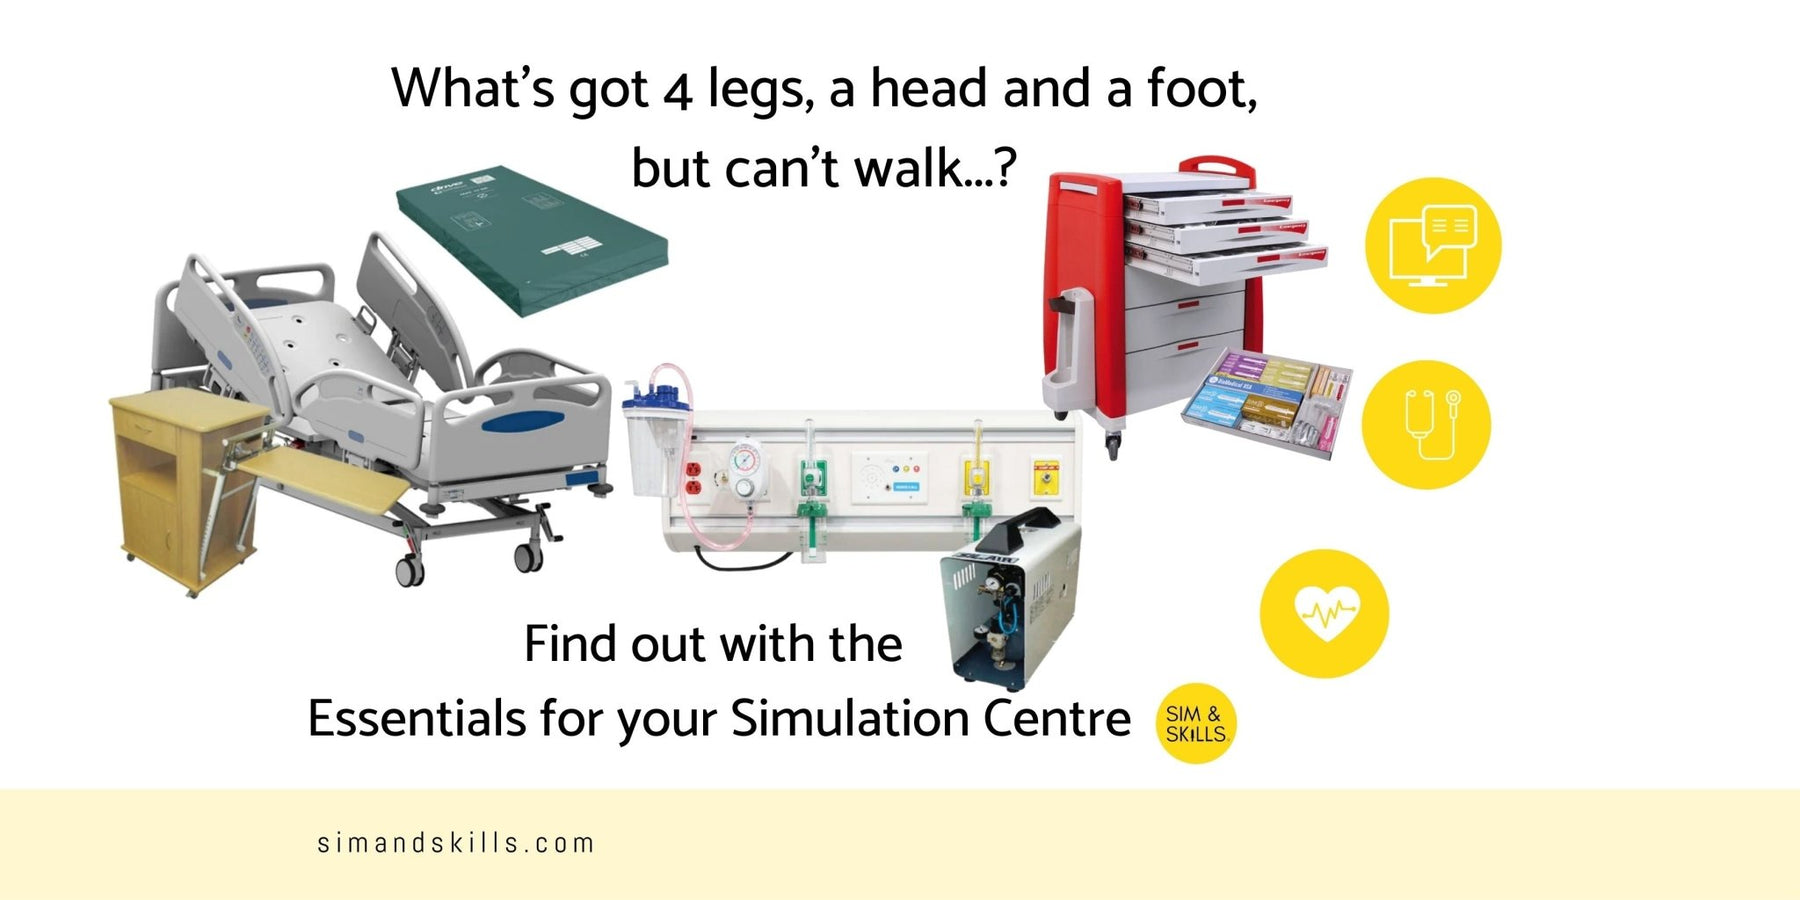 What’s got 4 legs, a head and a foot but can’t walk? - Sim & Skills